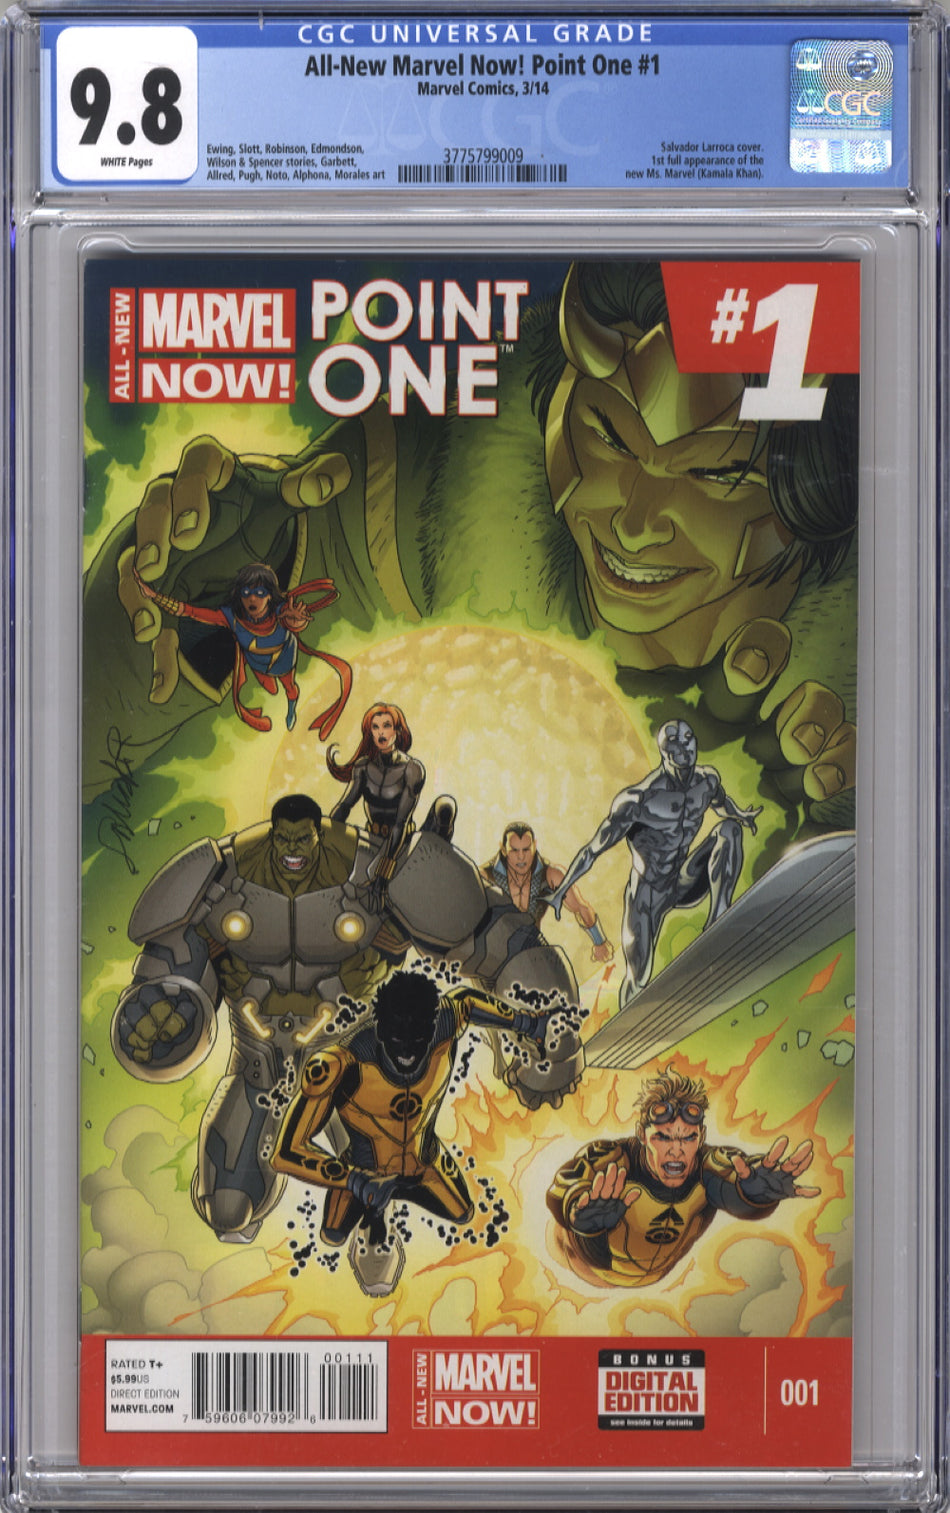 ALL NEW MARVEL NOW! POINT ONE 1 - CGC 9.8